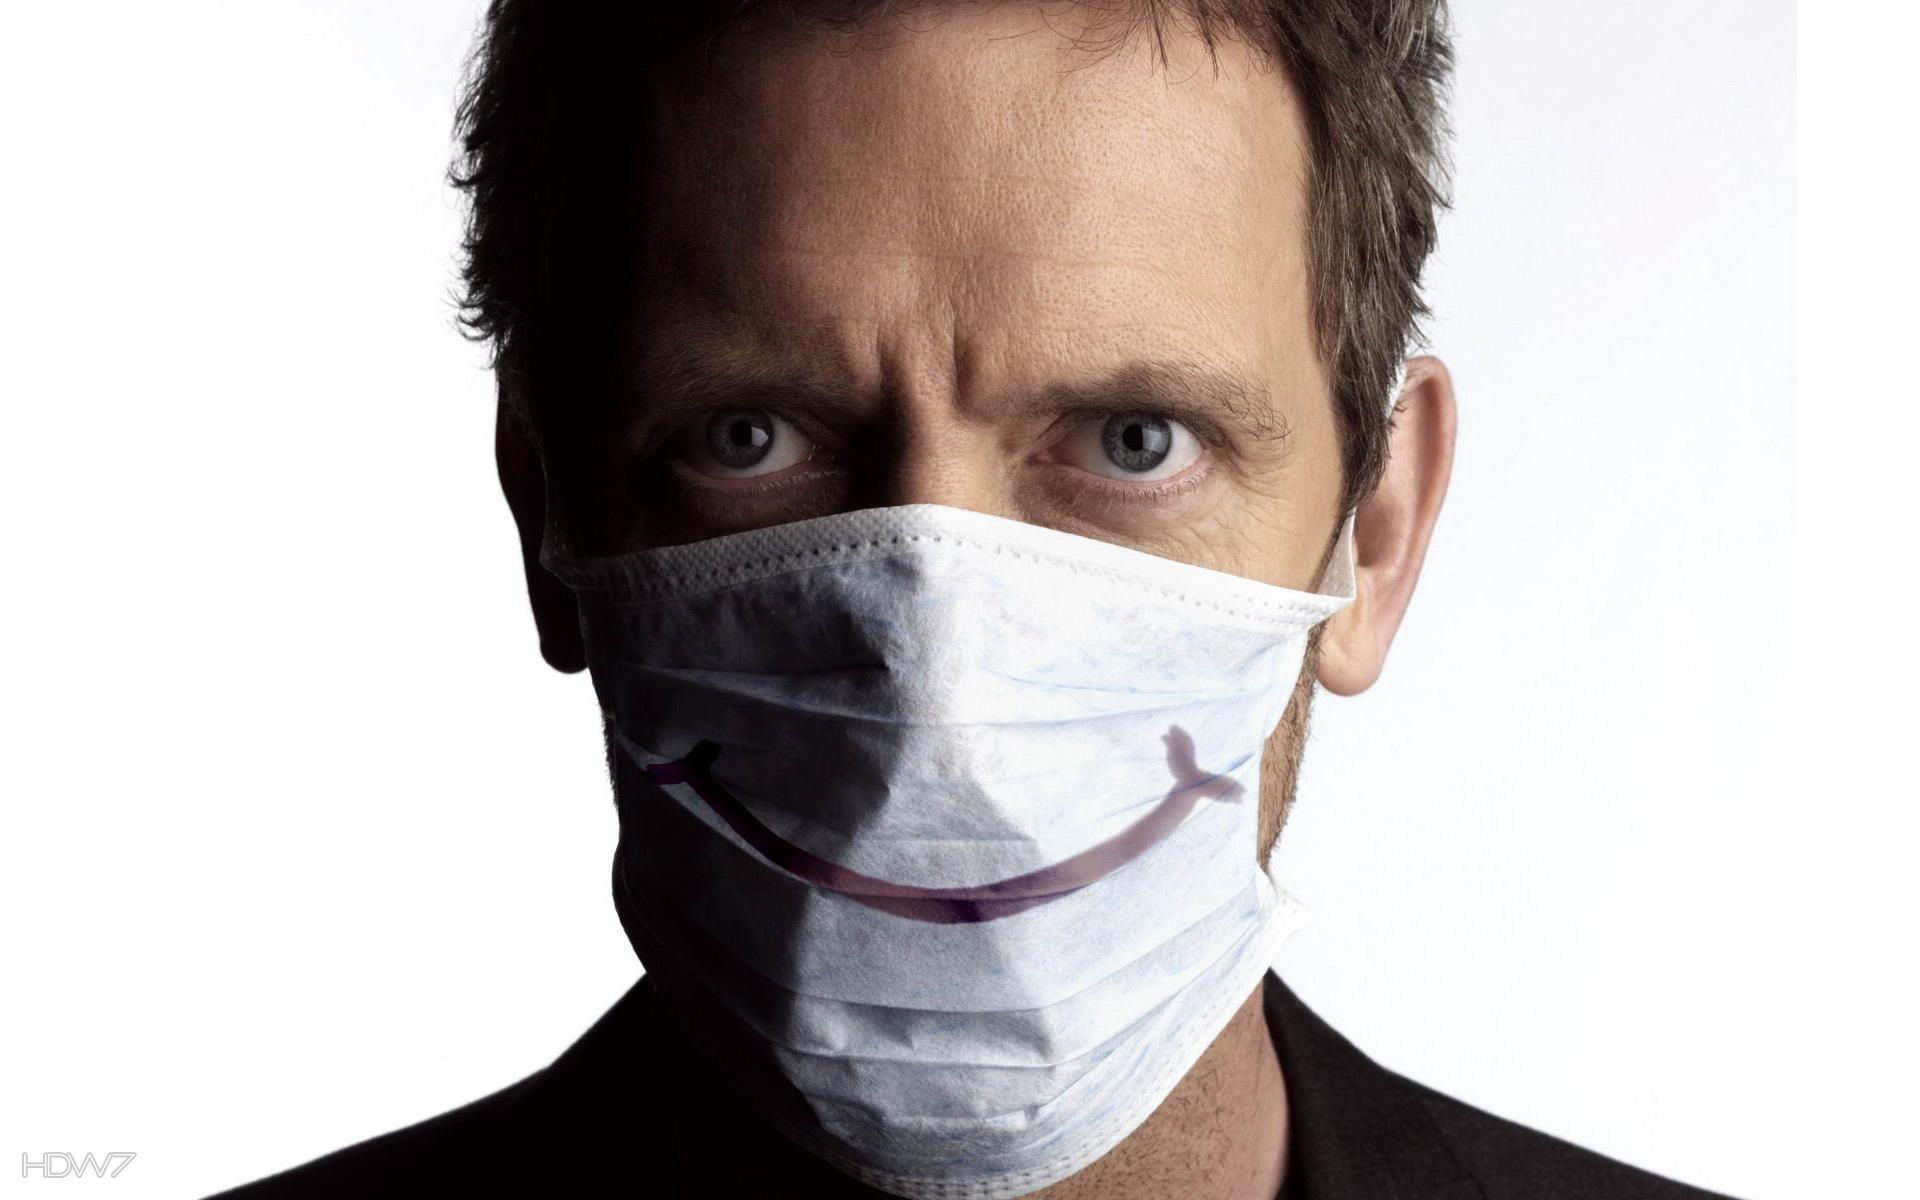 Dr House Smile - Dr House With Mask - HD Wallpaper 